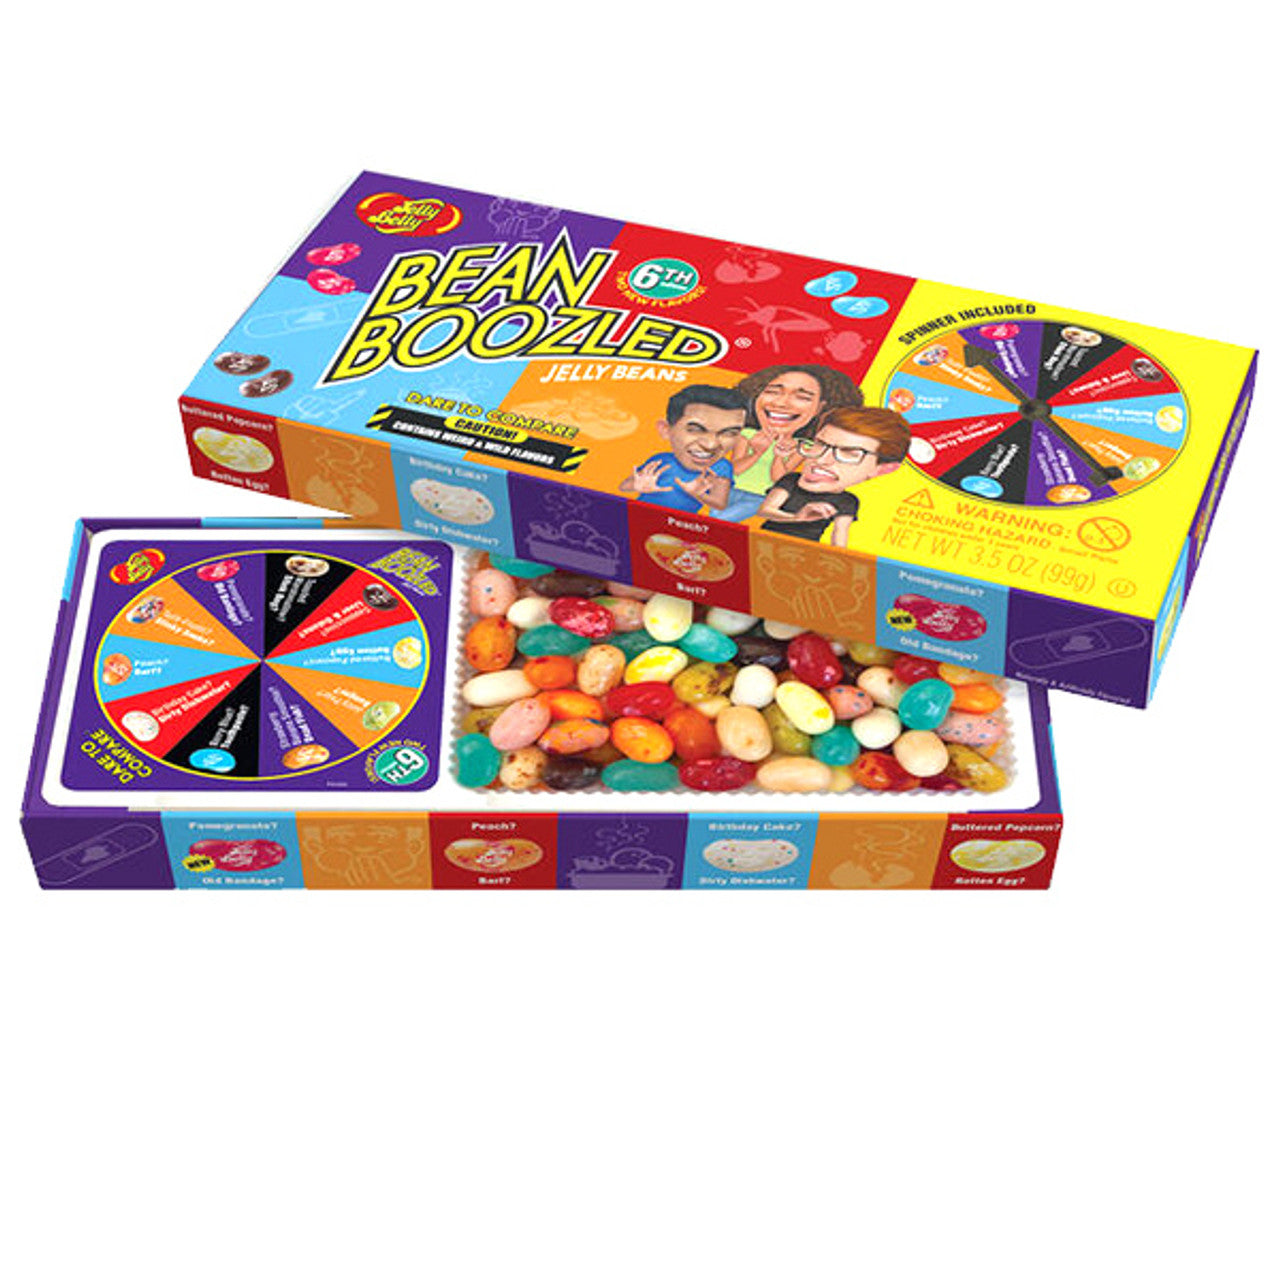 Jelly Belly Bean Boozled Game Box Series 6